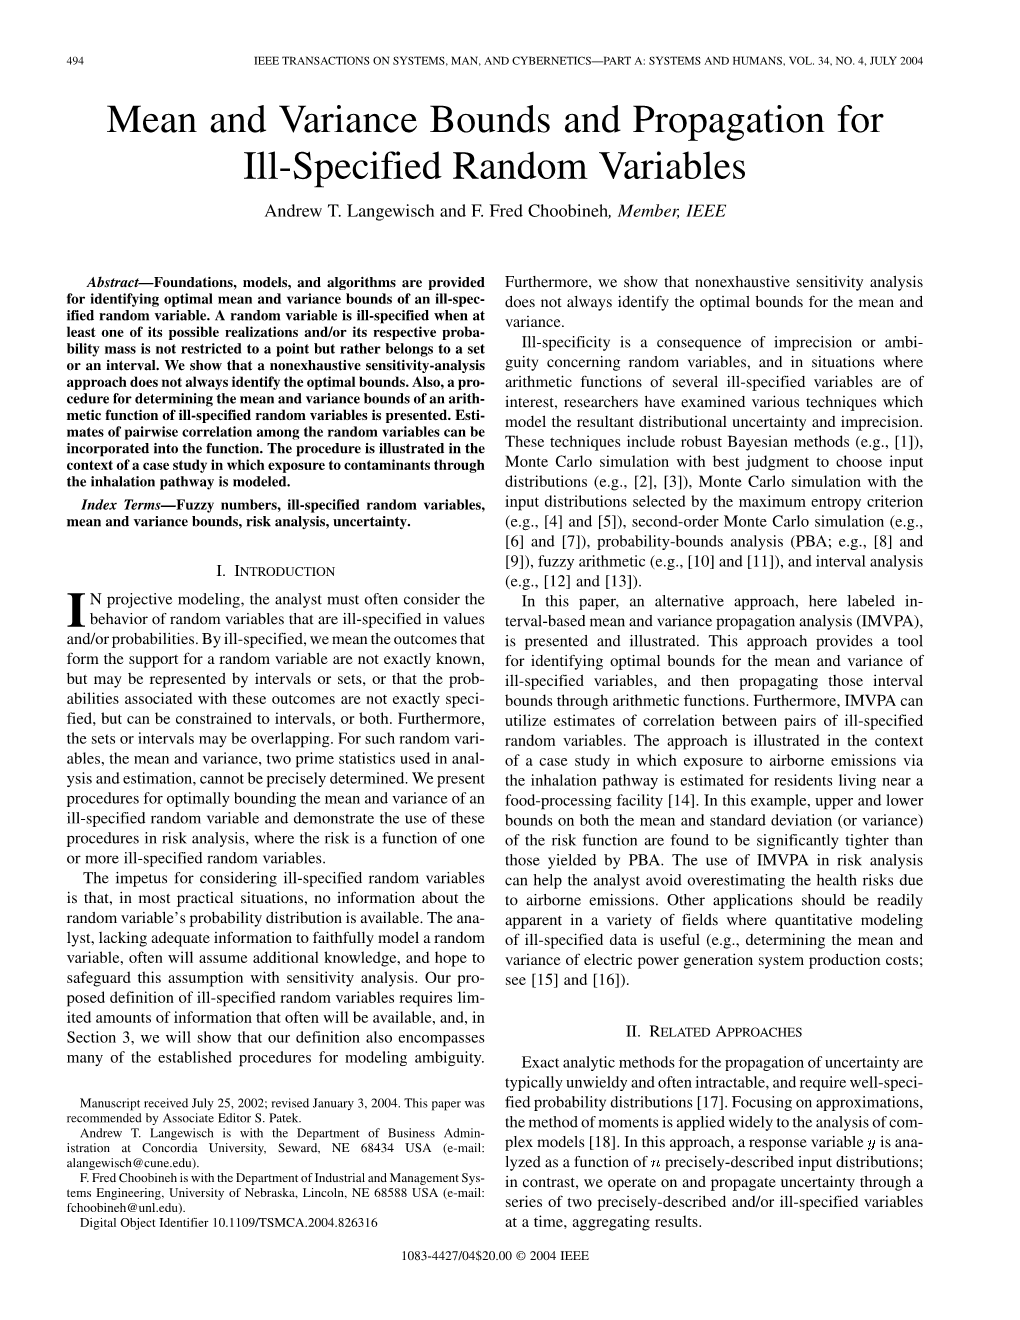 Mean and Variance Bounds and Propagation for Ill-Specified Random Variables Andrew T